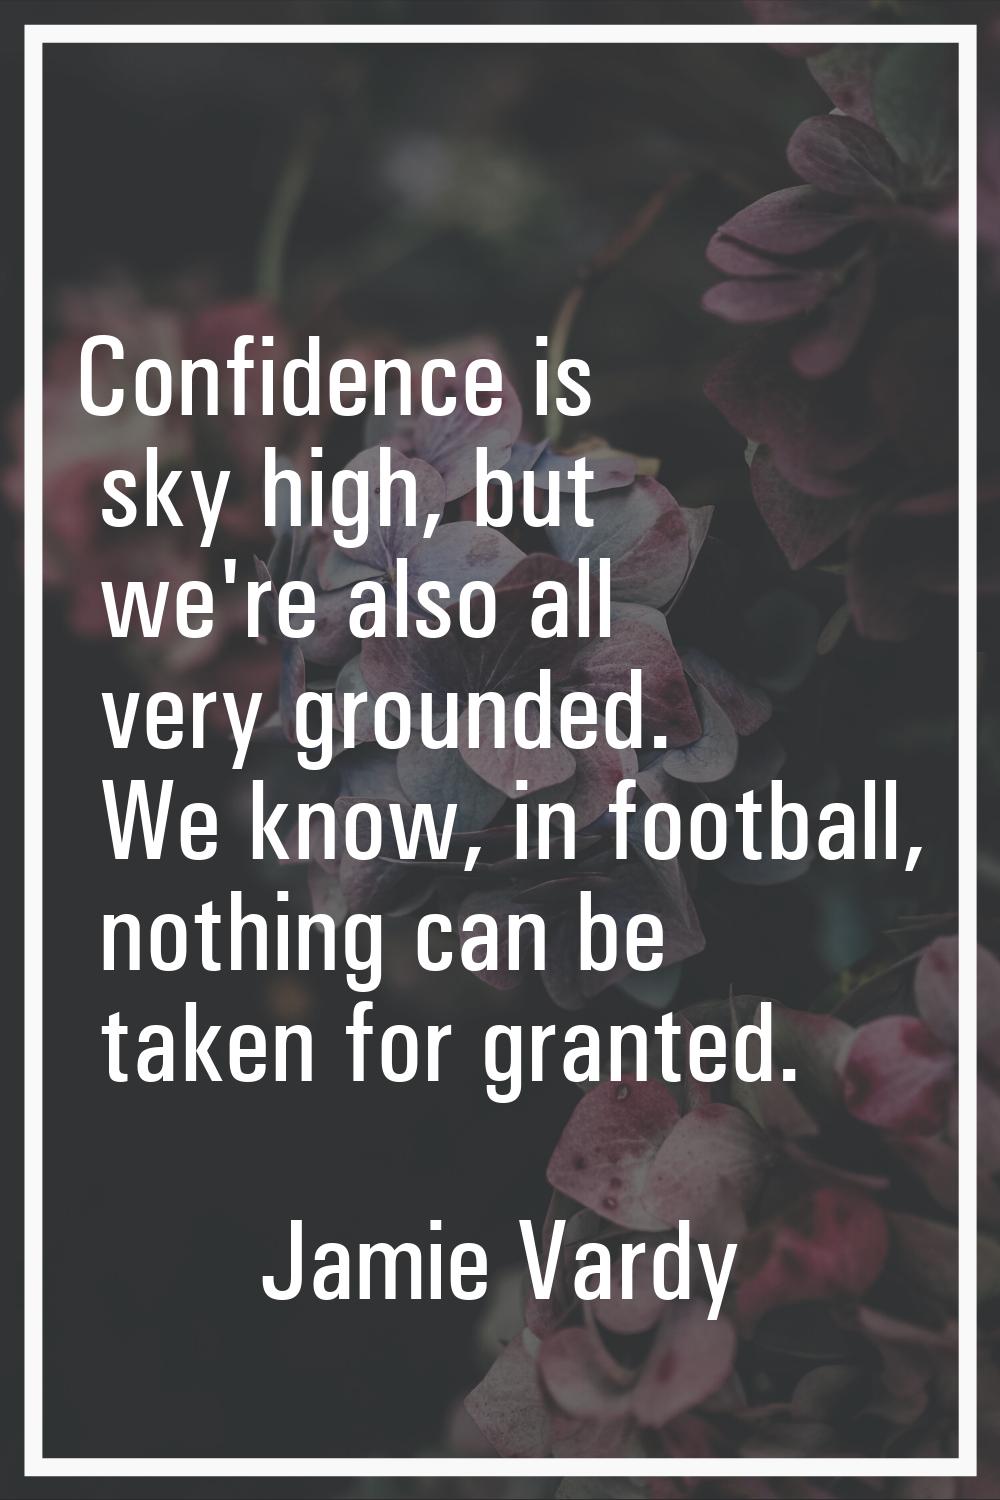 Confidence is sky high, but we're also all very grounded. We know, in football, nothing can be take